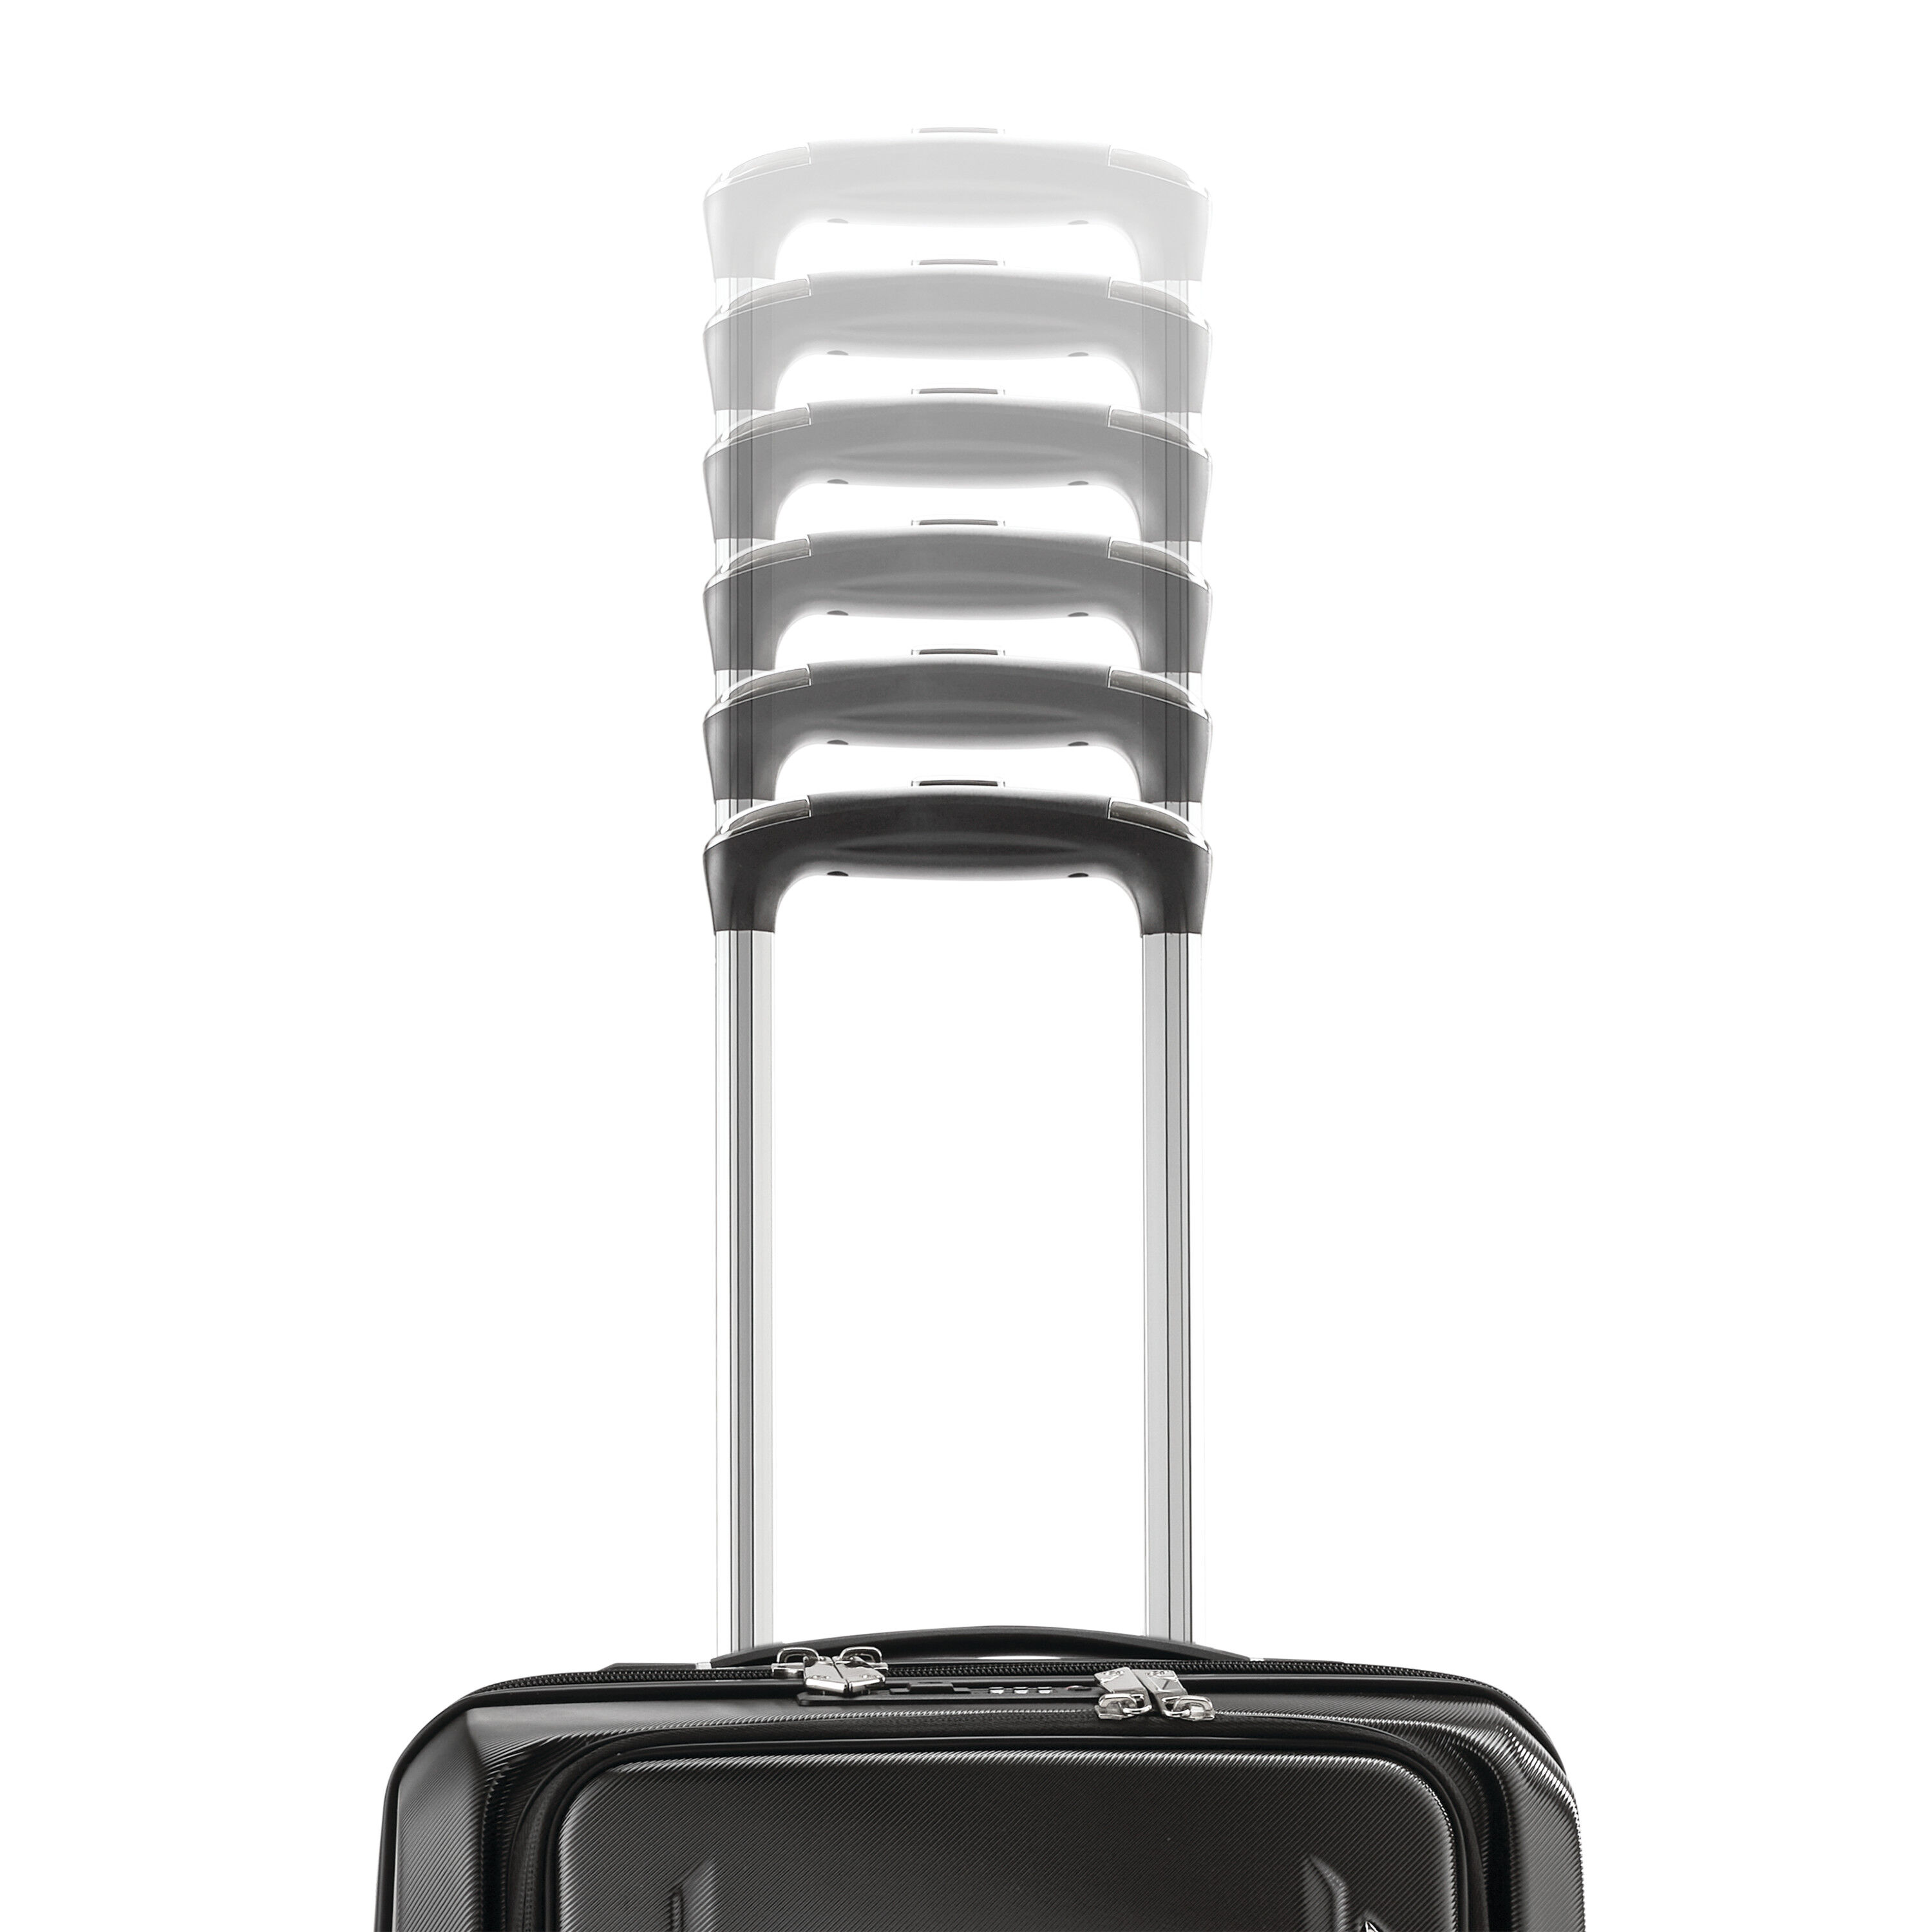 Buy Just Right CarryOn Spinner for USD 199.99 Samsonite US